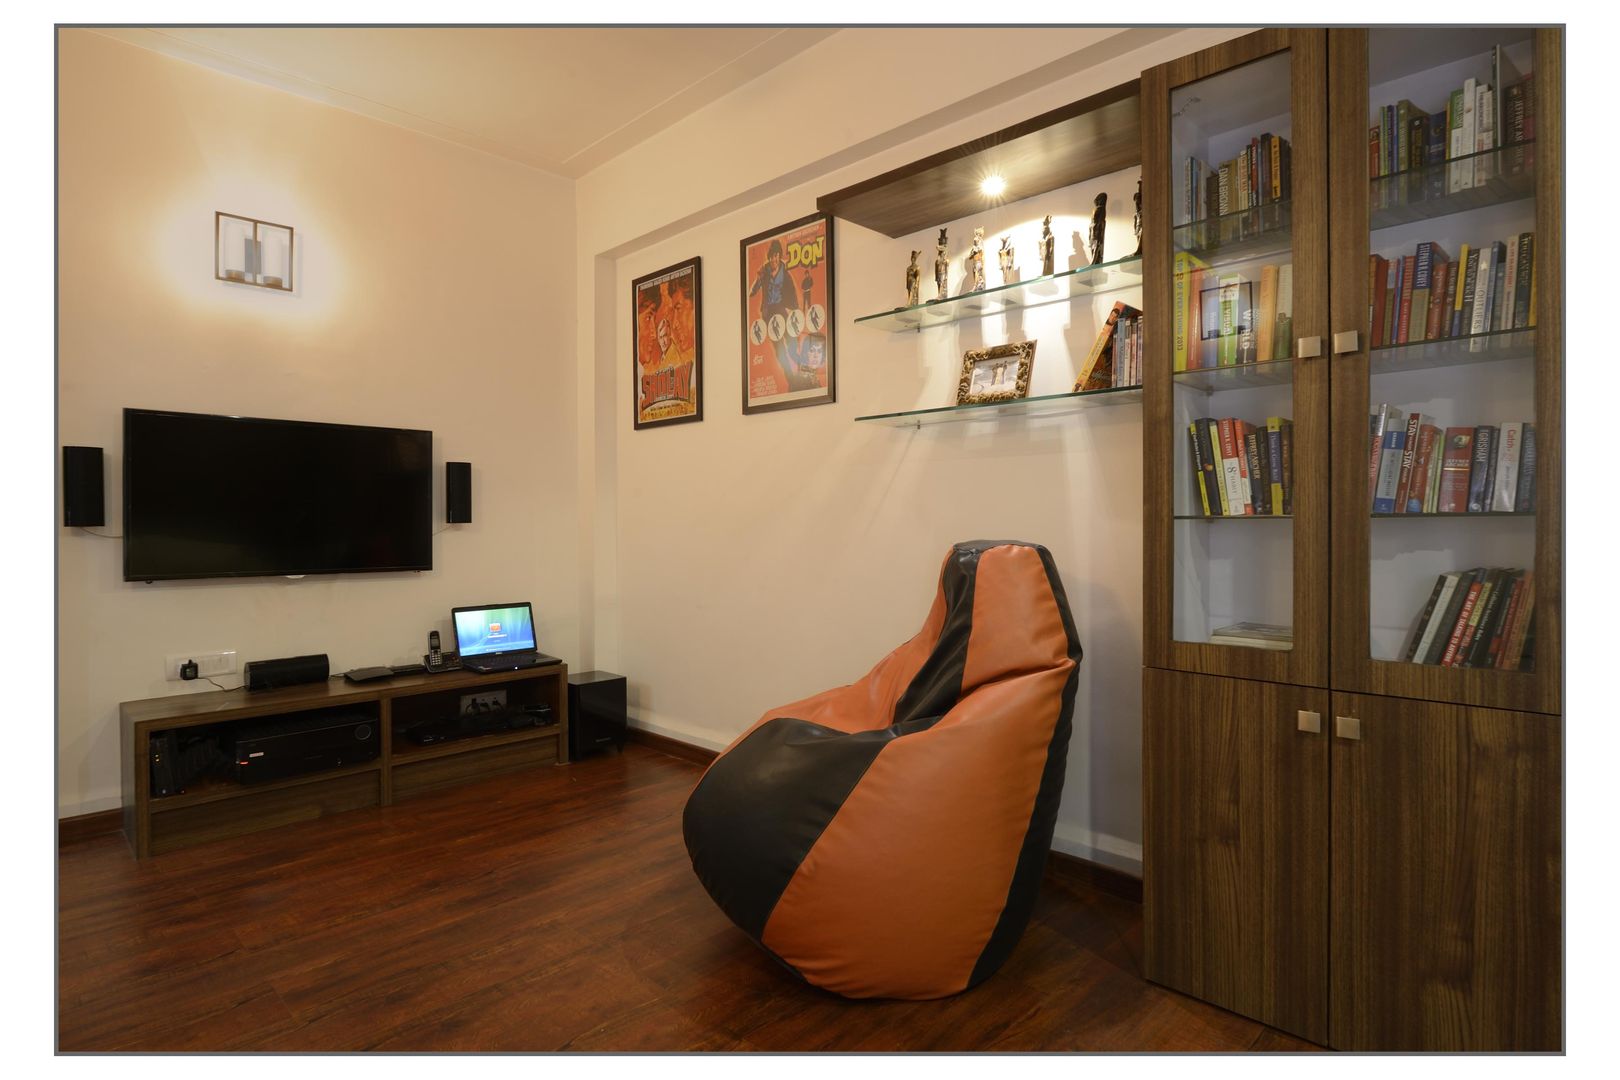 Media Room Navmiti Designs Other spaces Pictures & paintings